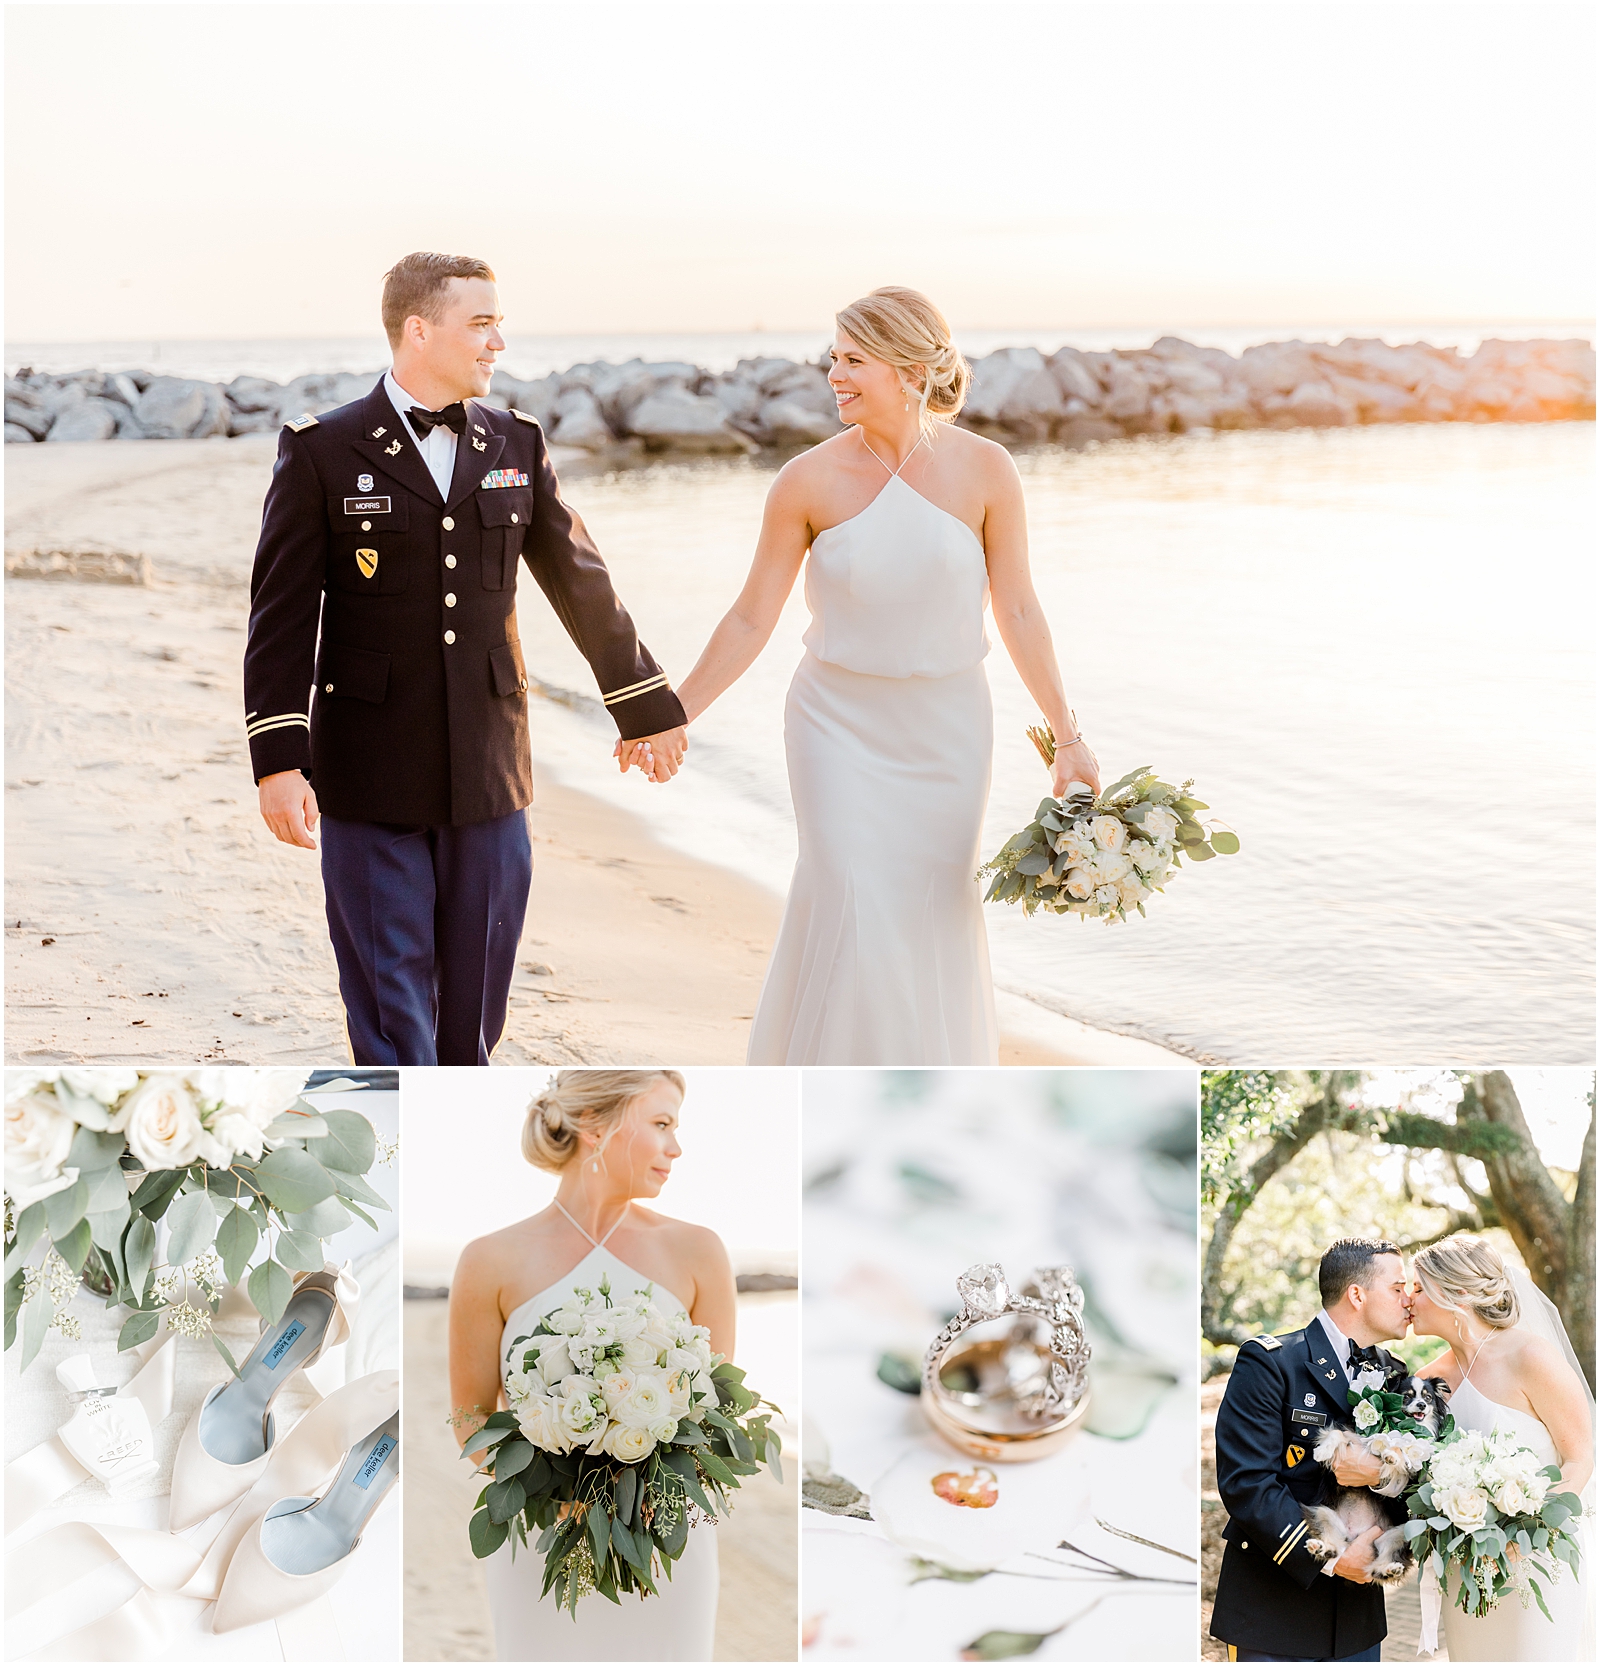 Point Clear Alabama Wedding Photographer at the Grand Hotel Jennie Tewell 0001